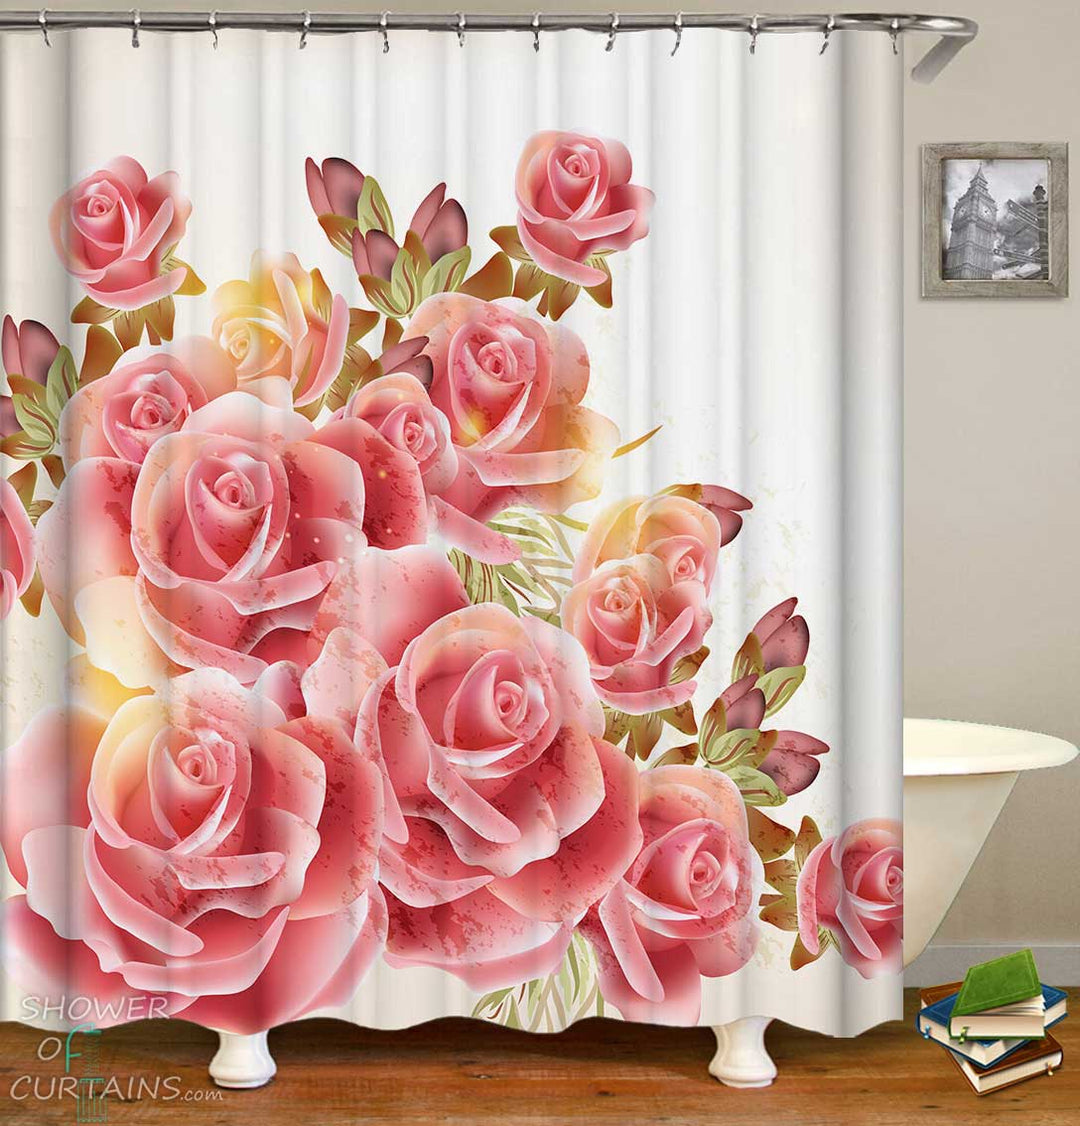 Shower Curtains with Pink Roses